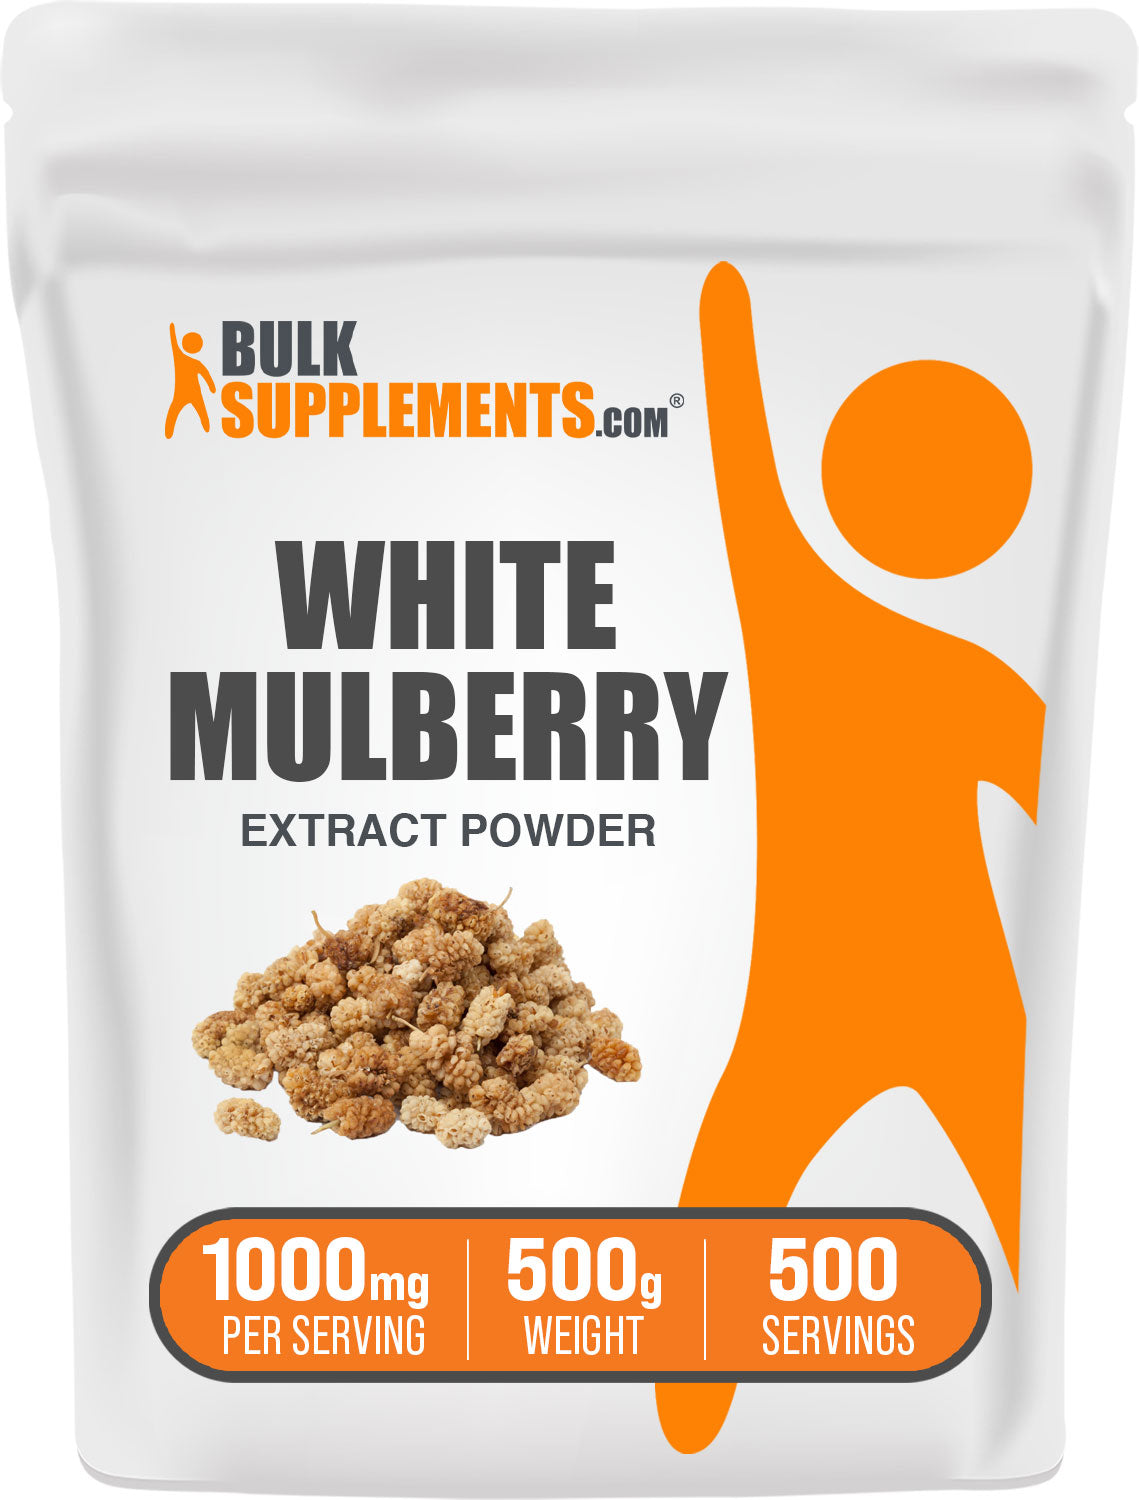 BulkSupplements.com White Mulberry Extract Powder 500g Bag